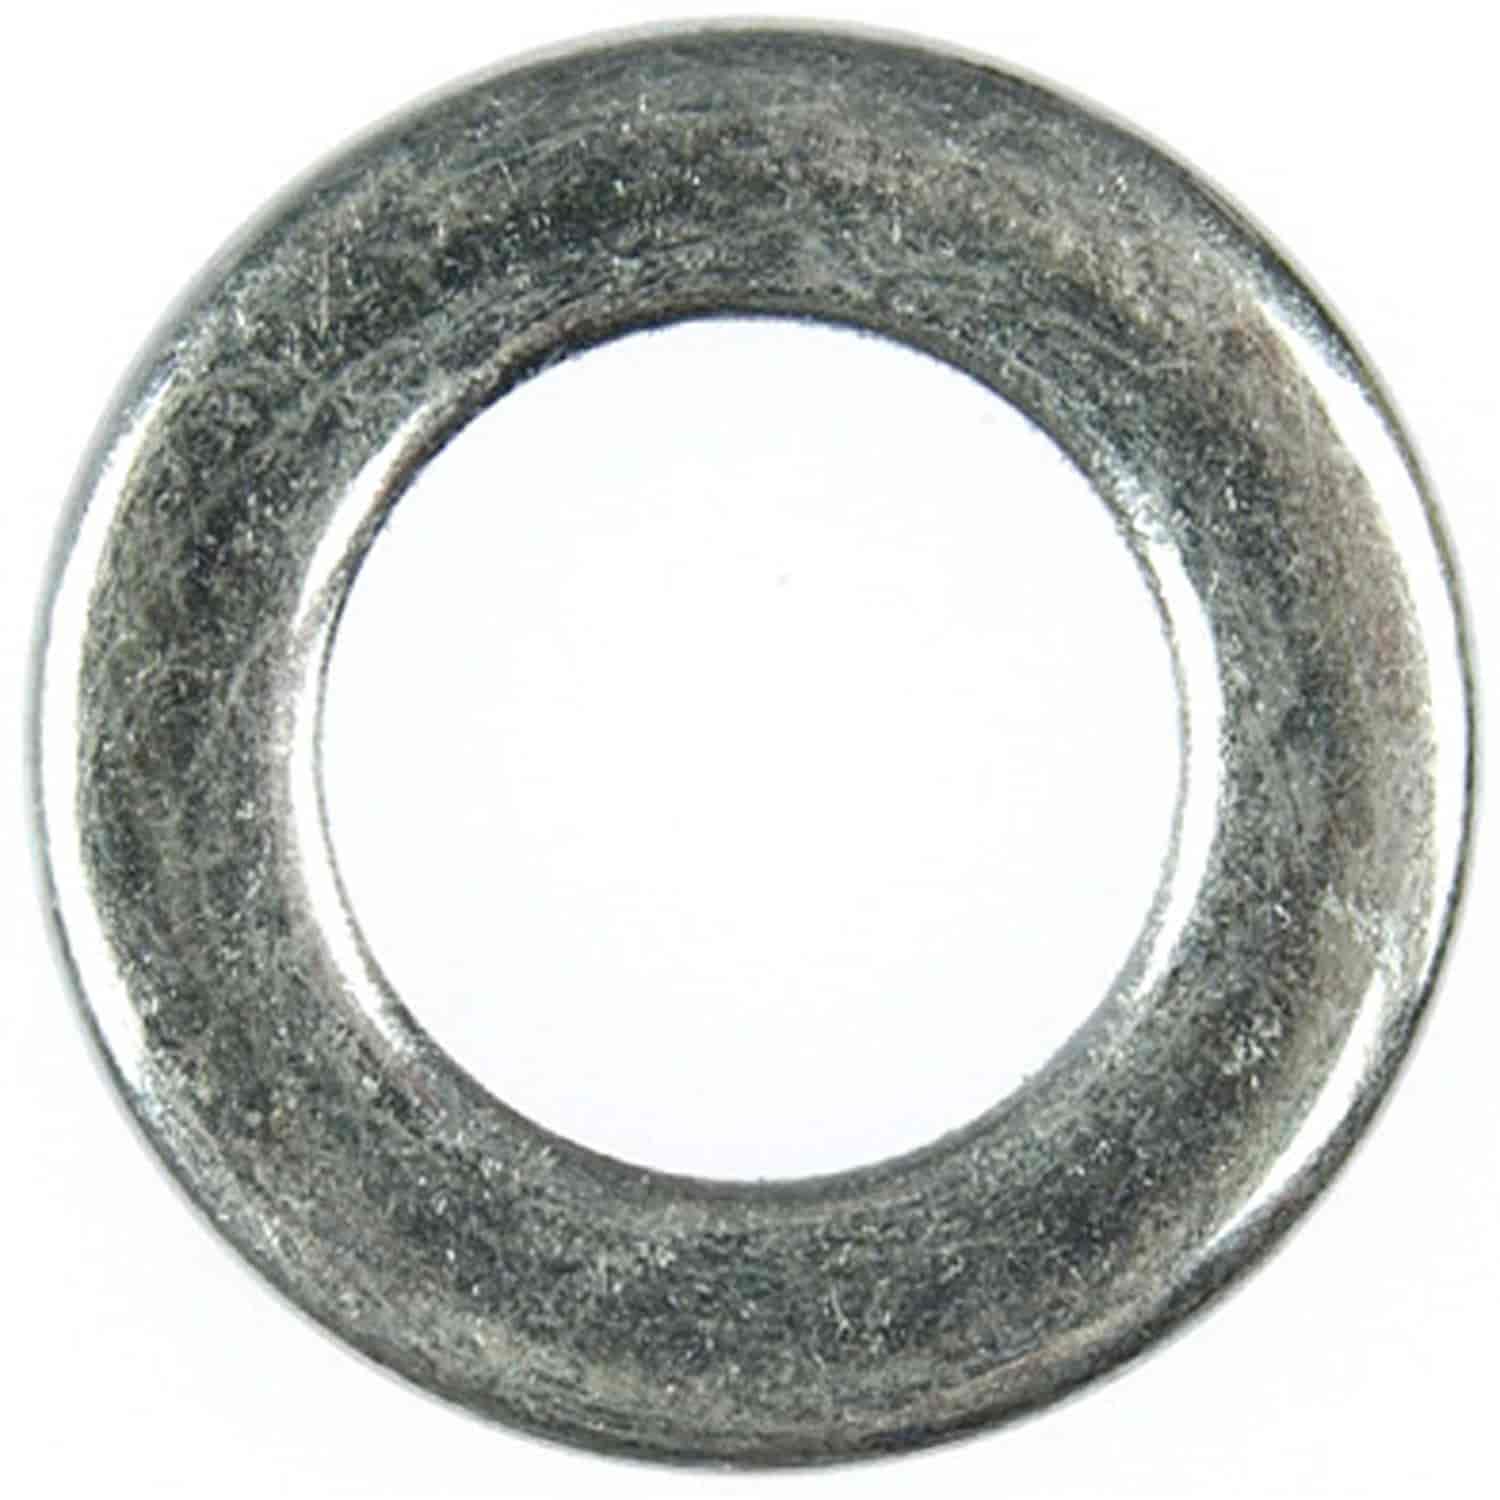 Mag Wheel Washer 11/16 In. I.D. 1.2 In. O.D. 0.14 In. Thickness